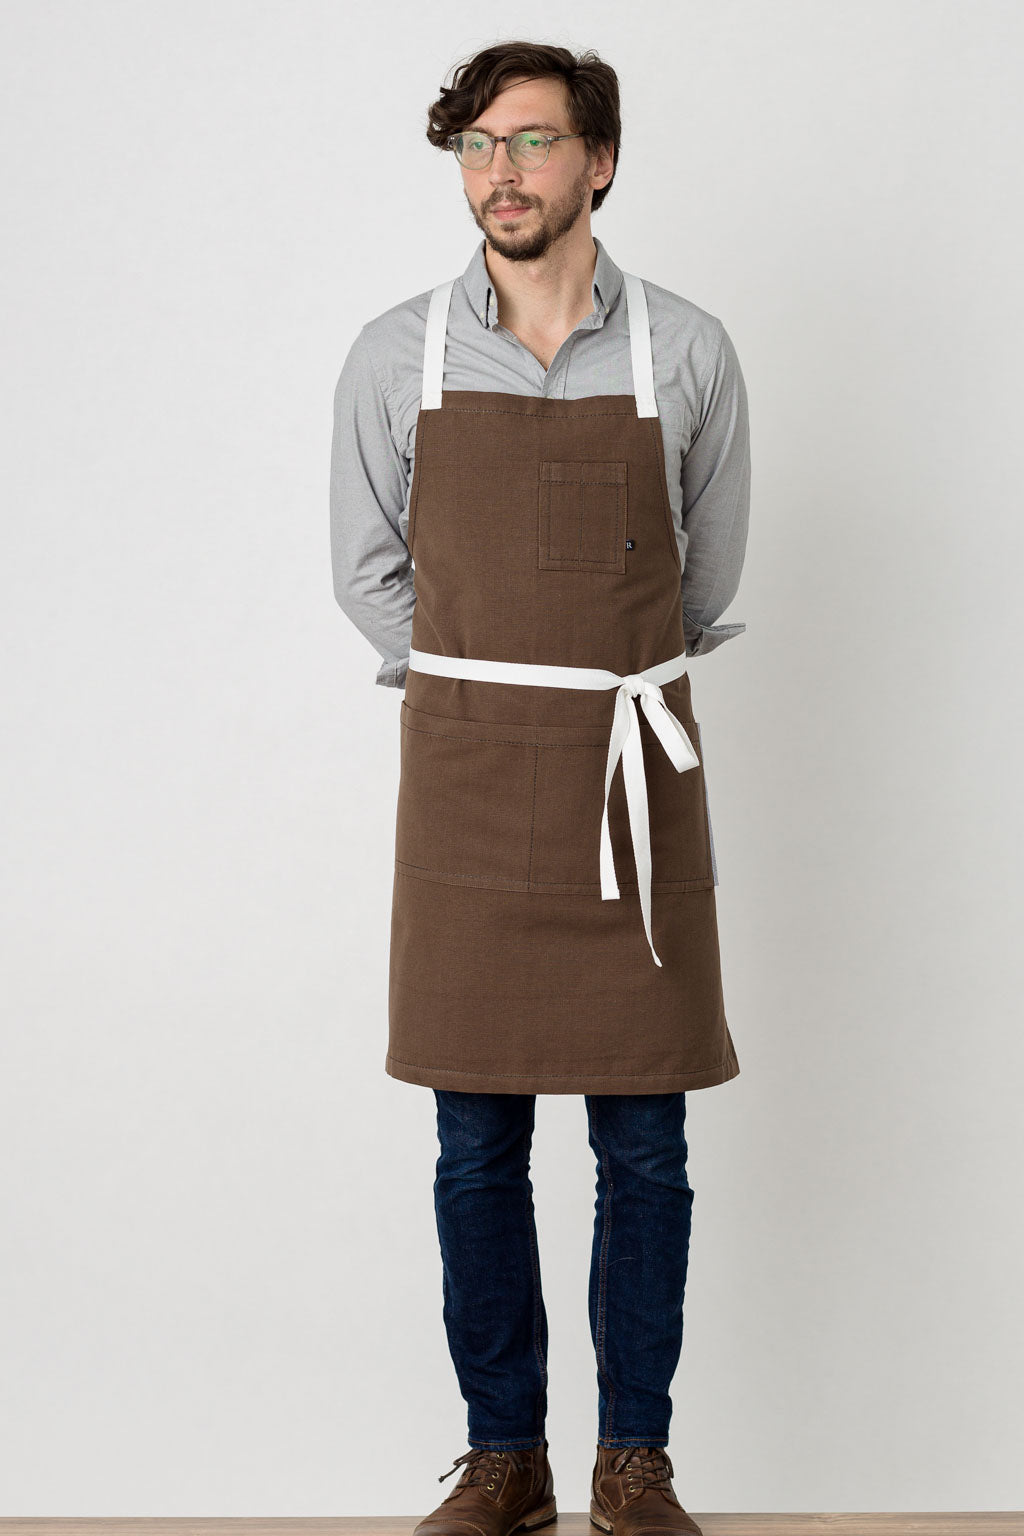 The Cross-Back Aprons Our Food Editors Never Want to Take Off